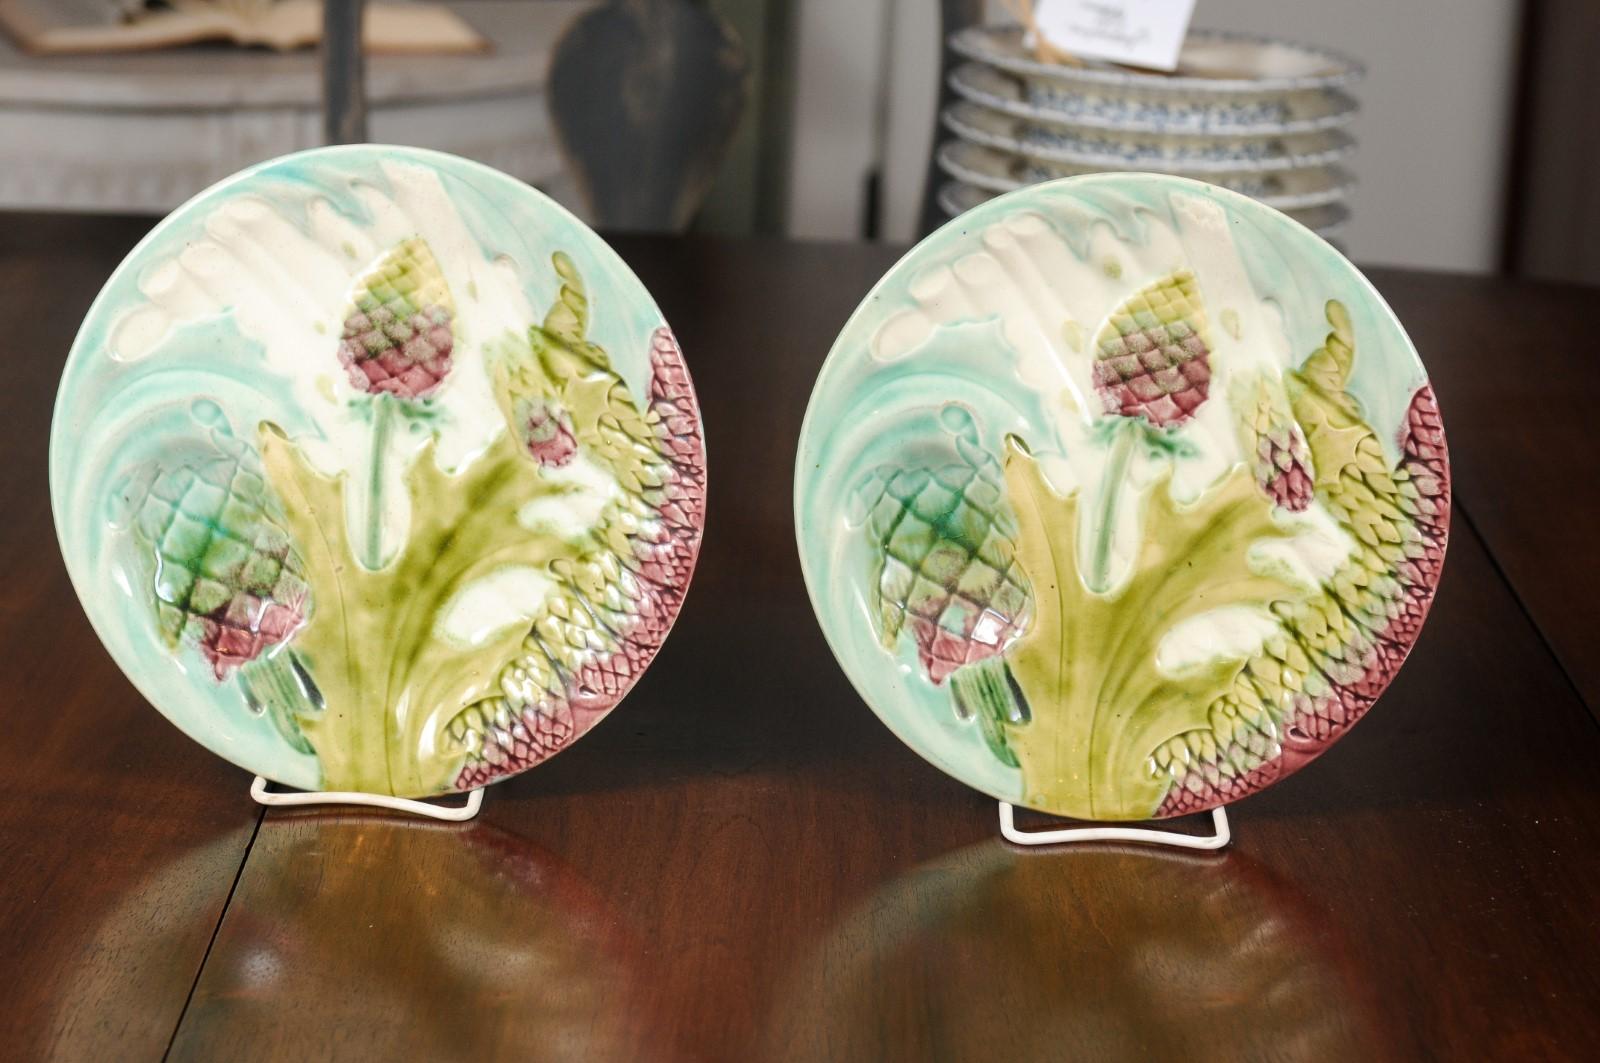 A pair of French late 19th century majolica asparagus and artichoke plates from Lunéville. Born in the Lorraine area of France during the last quarter of the 19th century, this pair of asparagus and artichoke plates features a turquoise ground